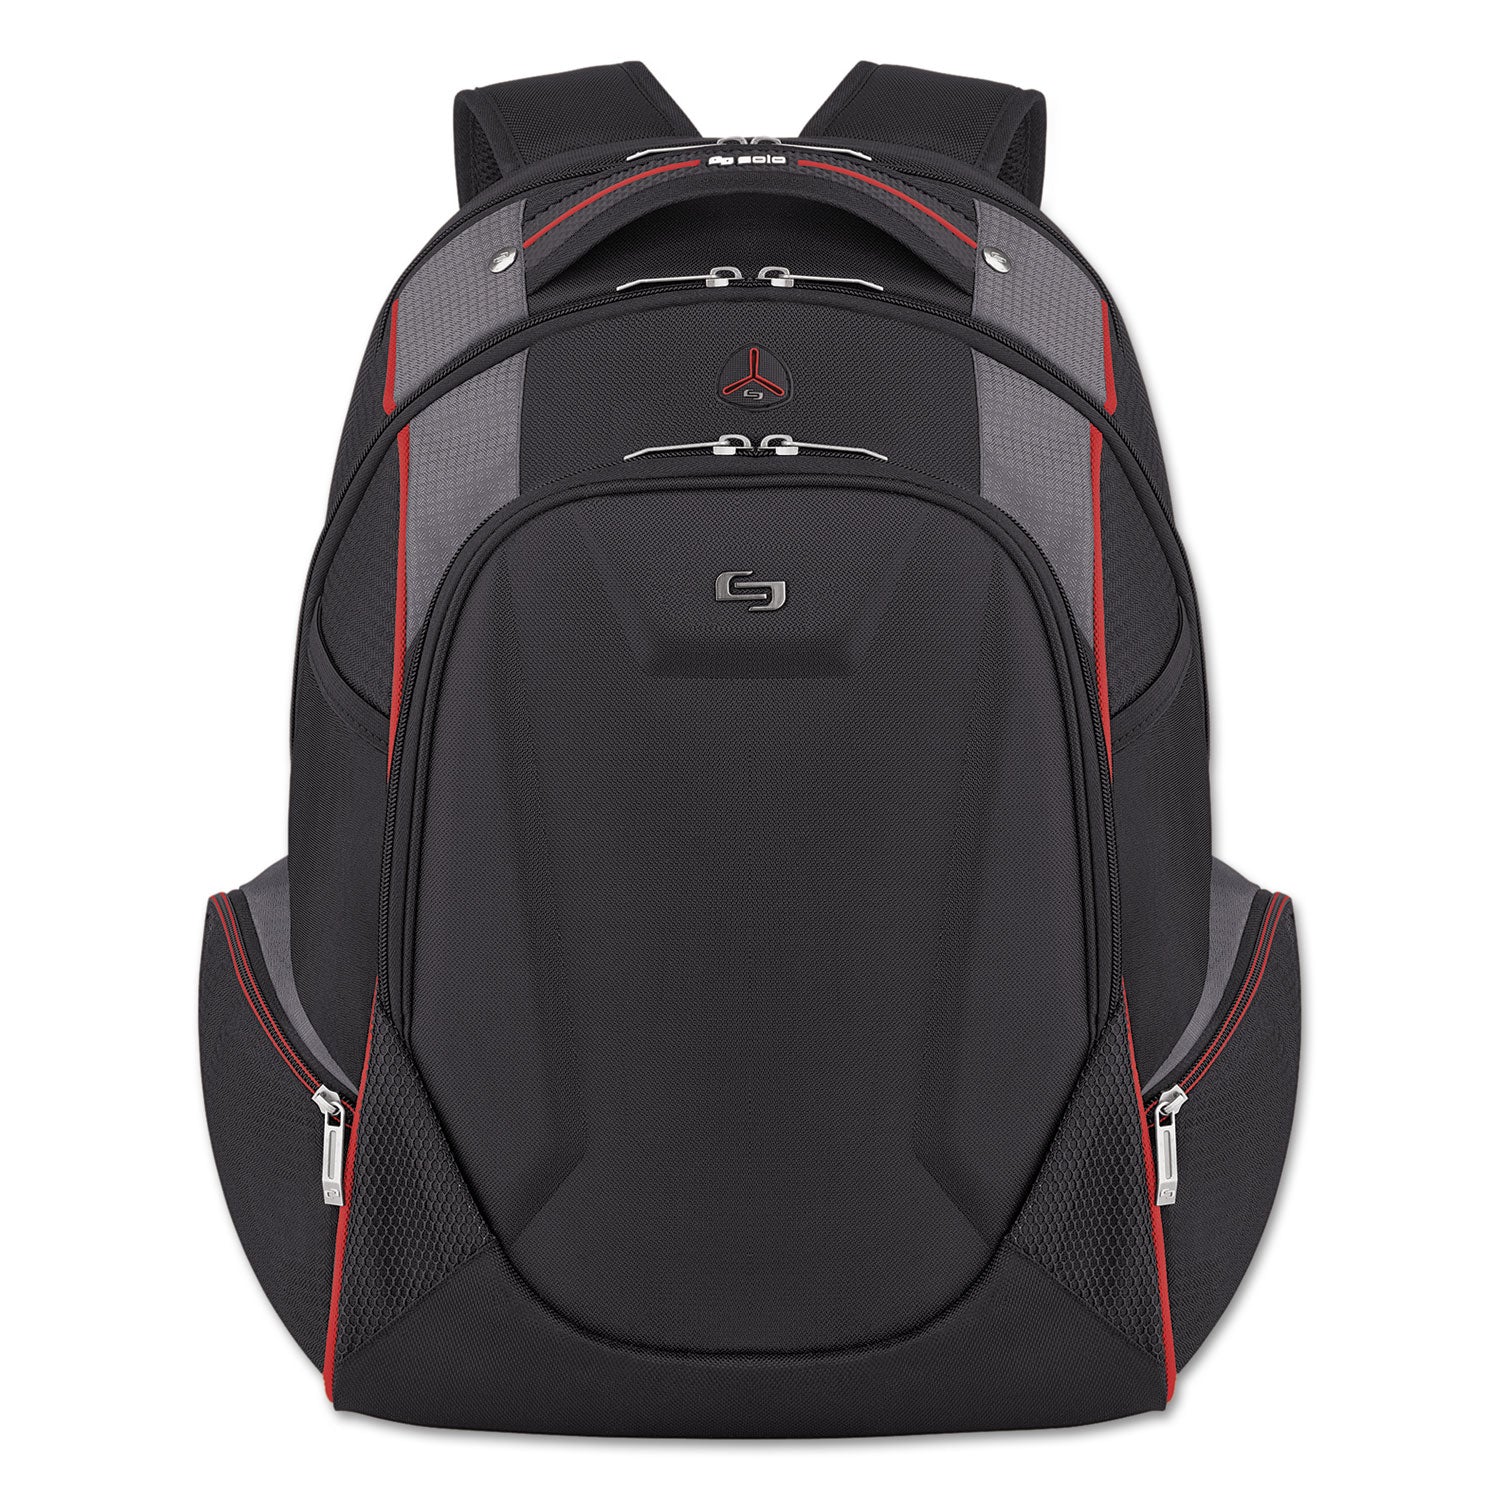 launch-laptop-backpack-fits-devices-up-to-173-polyester-125-x-8-x-195-black-gray-red_uslacv7114 - 1